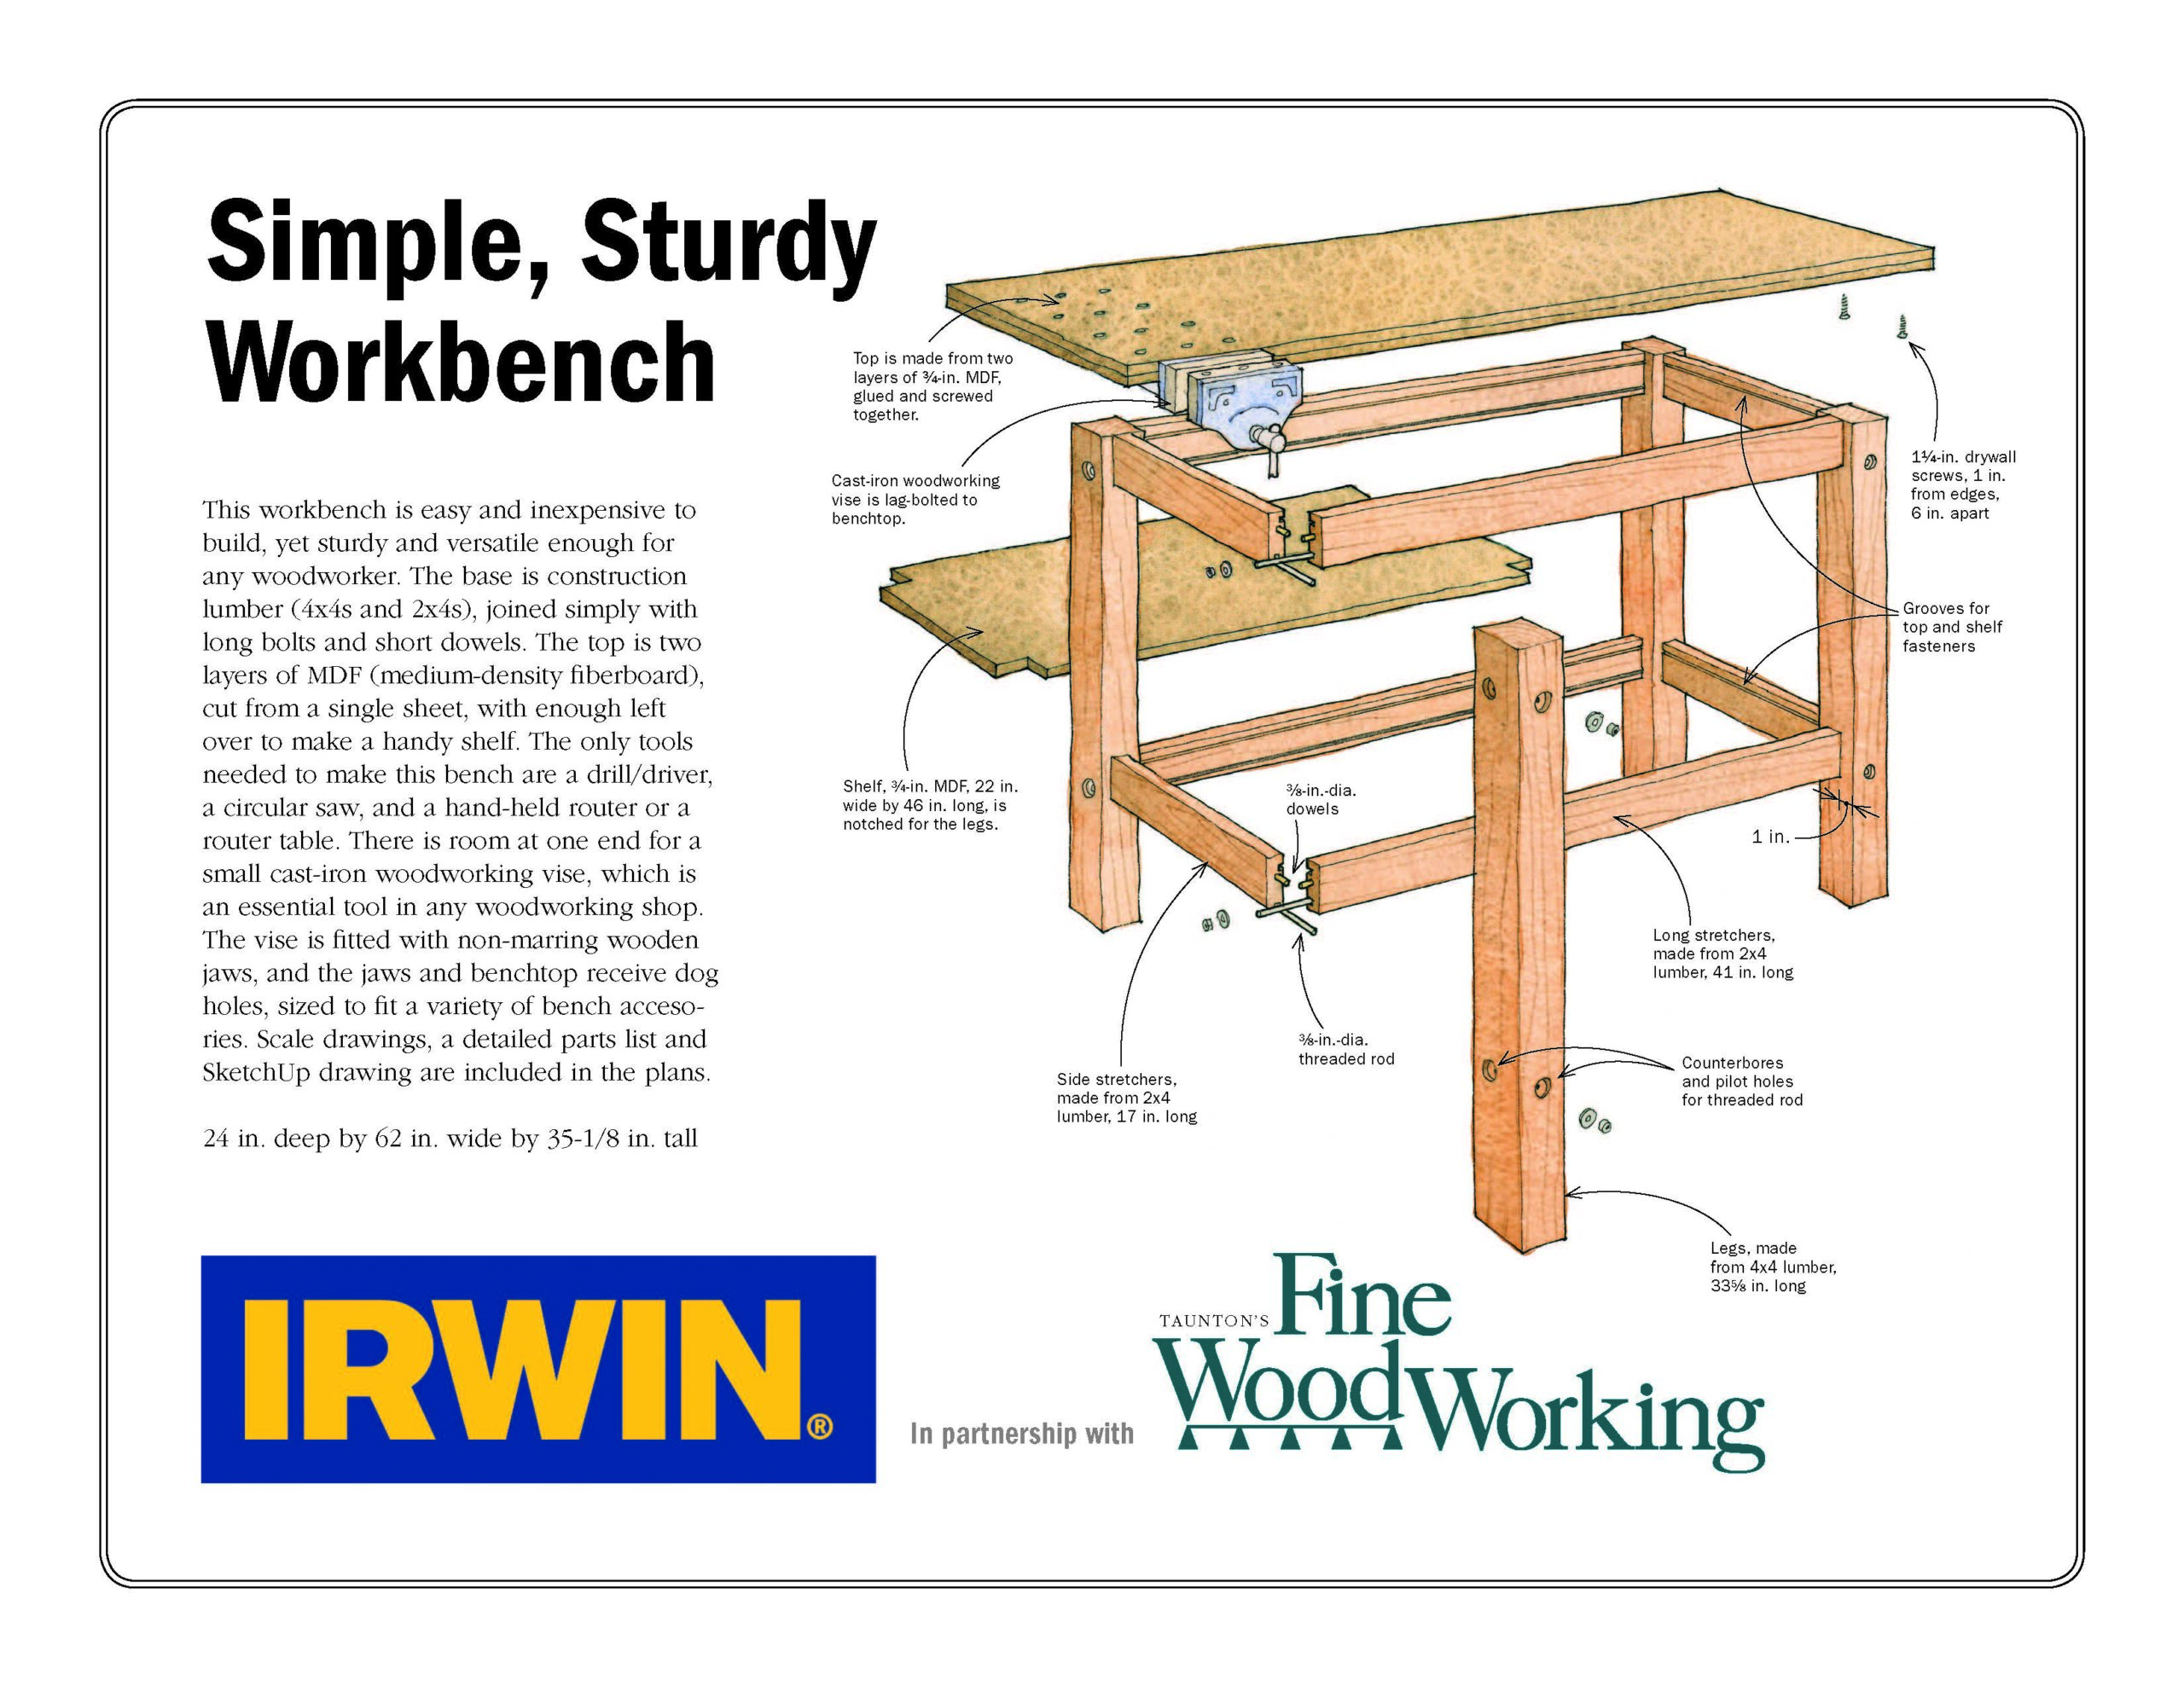 https://images.finewoodworking.com/app/uploads/2021/07/07185451/Cover_Irwin_Simple-Sturdy-Workbench-scaled.jpg